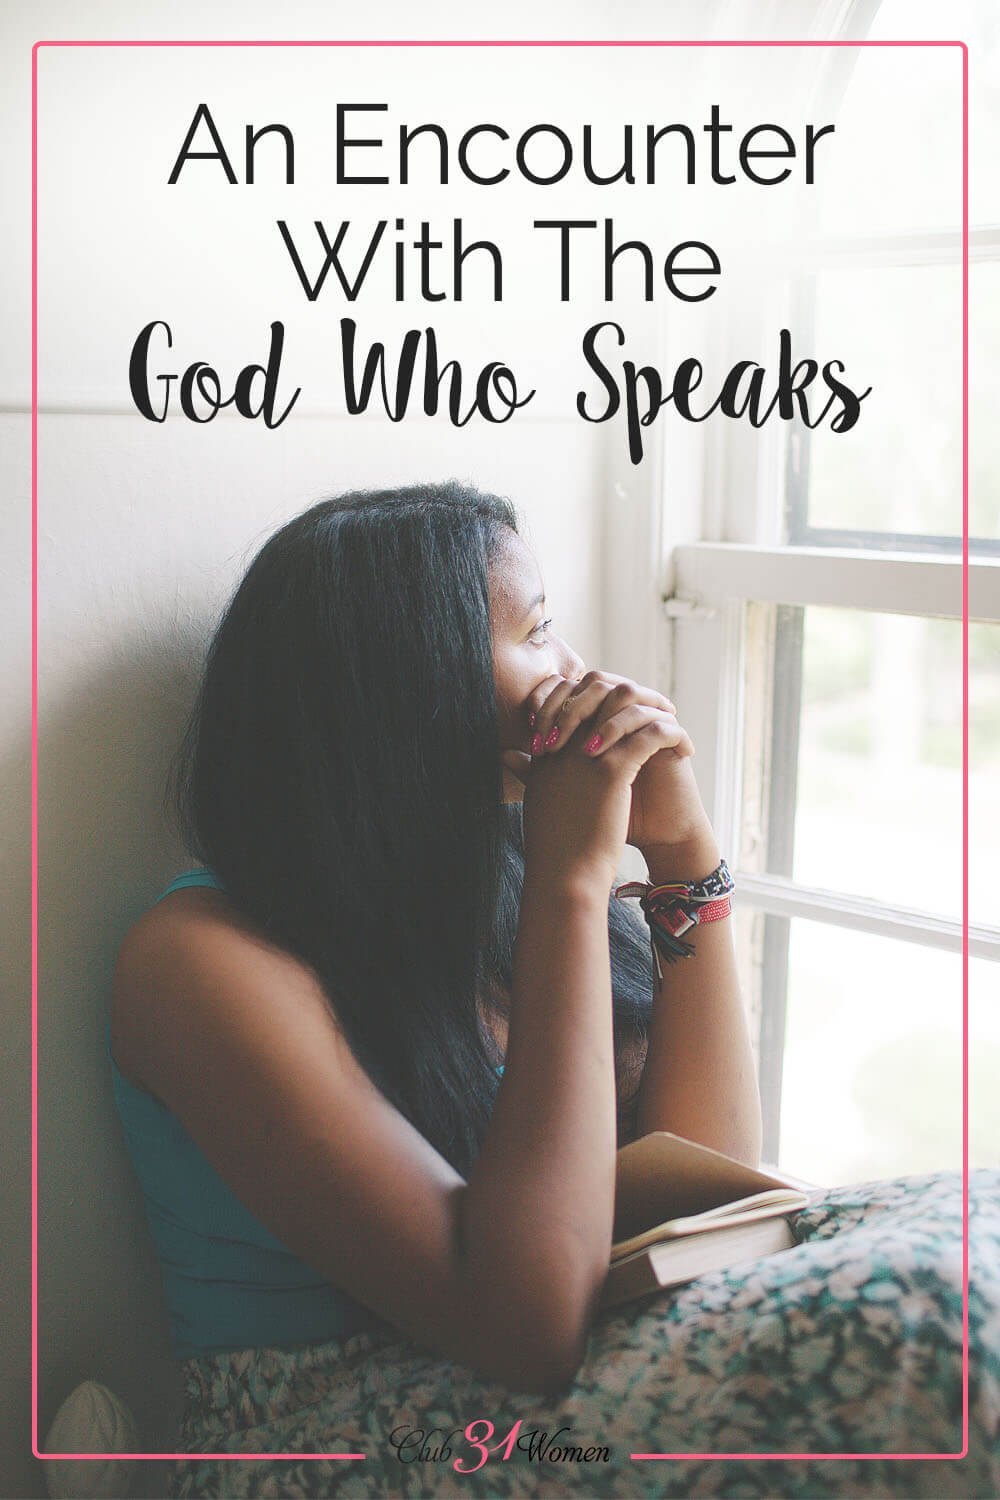 Sometimes having an encounter with God isn't loud and obvious. Most of the time it's subtle and quiet. We need to listen to hear Him speak. via @Club31Women